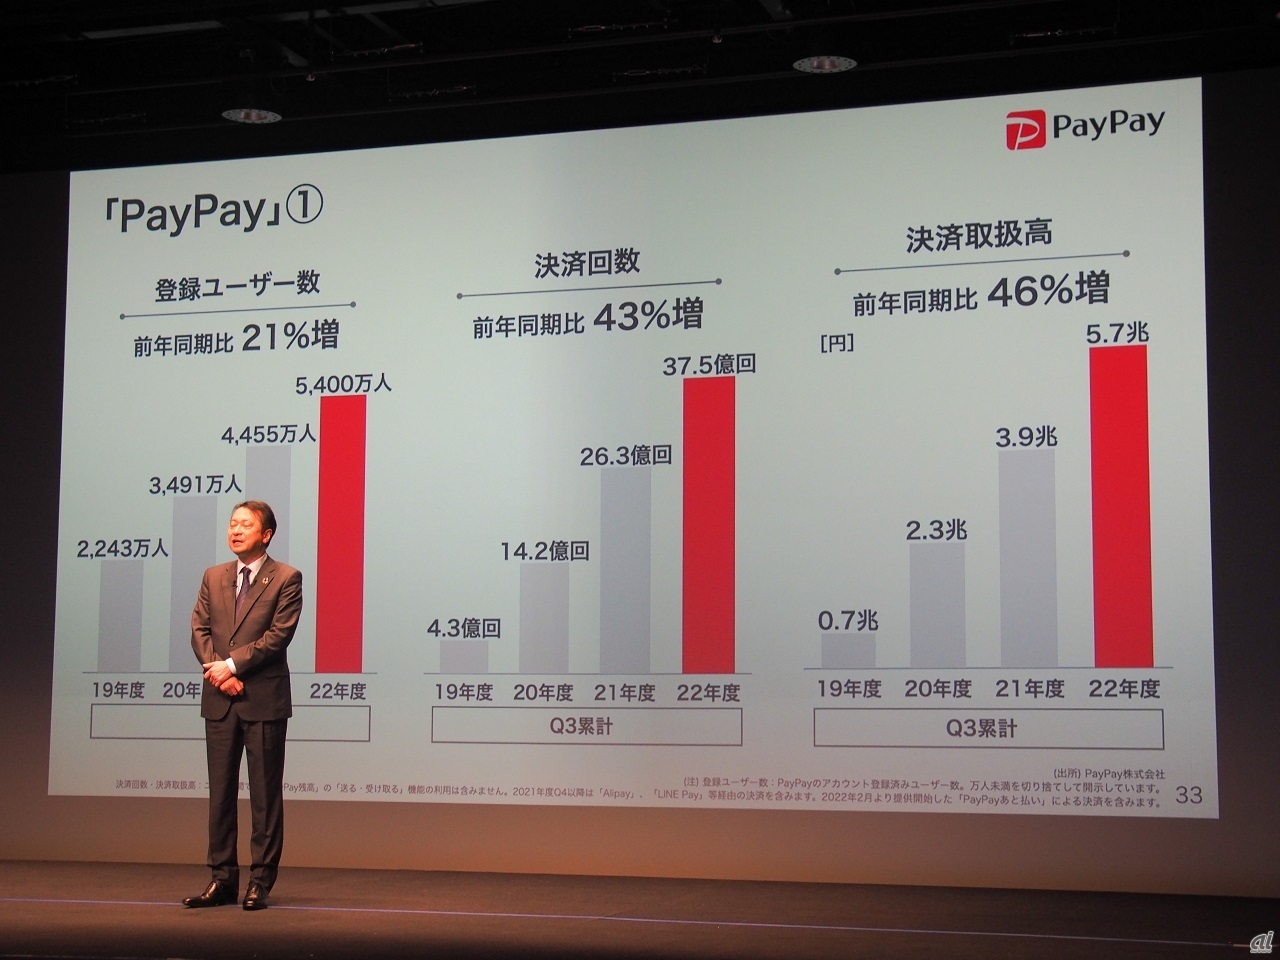 PayPayは登録ユーザー数、決済取扱高など主要指標が堅調に増加。黒字化も見えつつあるという